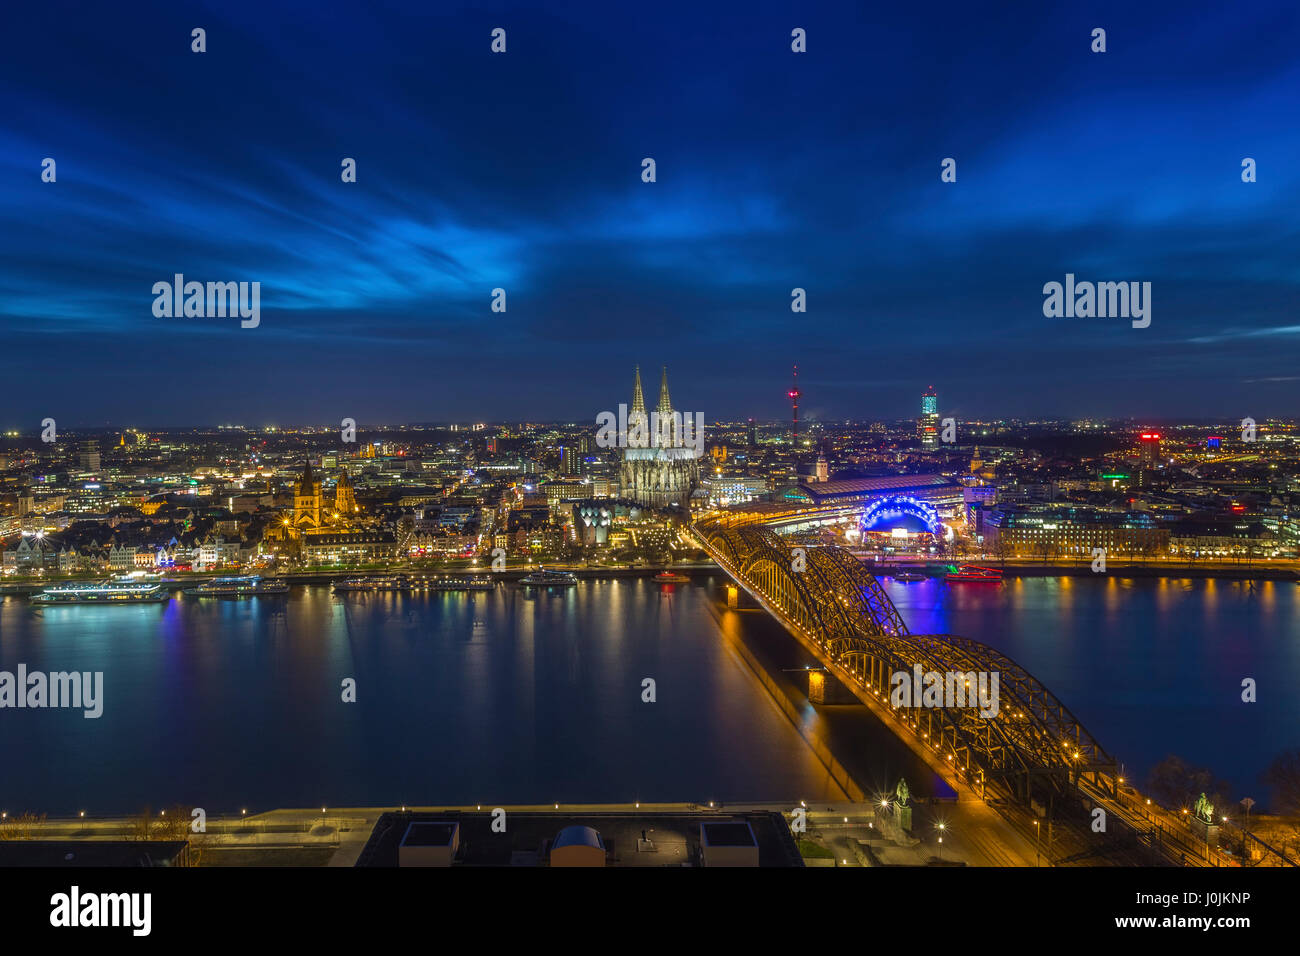 Cologne, Germany - Aerial skyline view of Cologne with the beautiful Cologne Cathedral, Rhine River and Hohenzollern Bridge by night Stock Photo